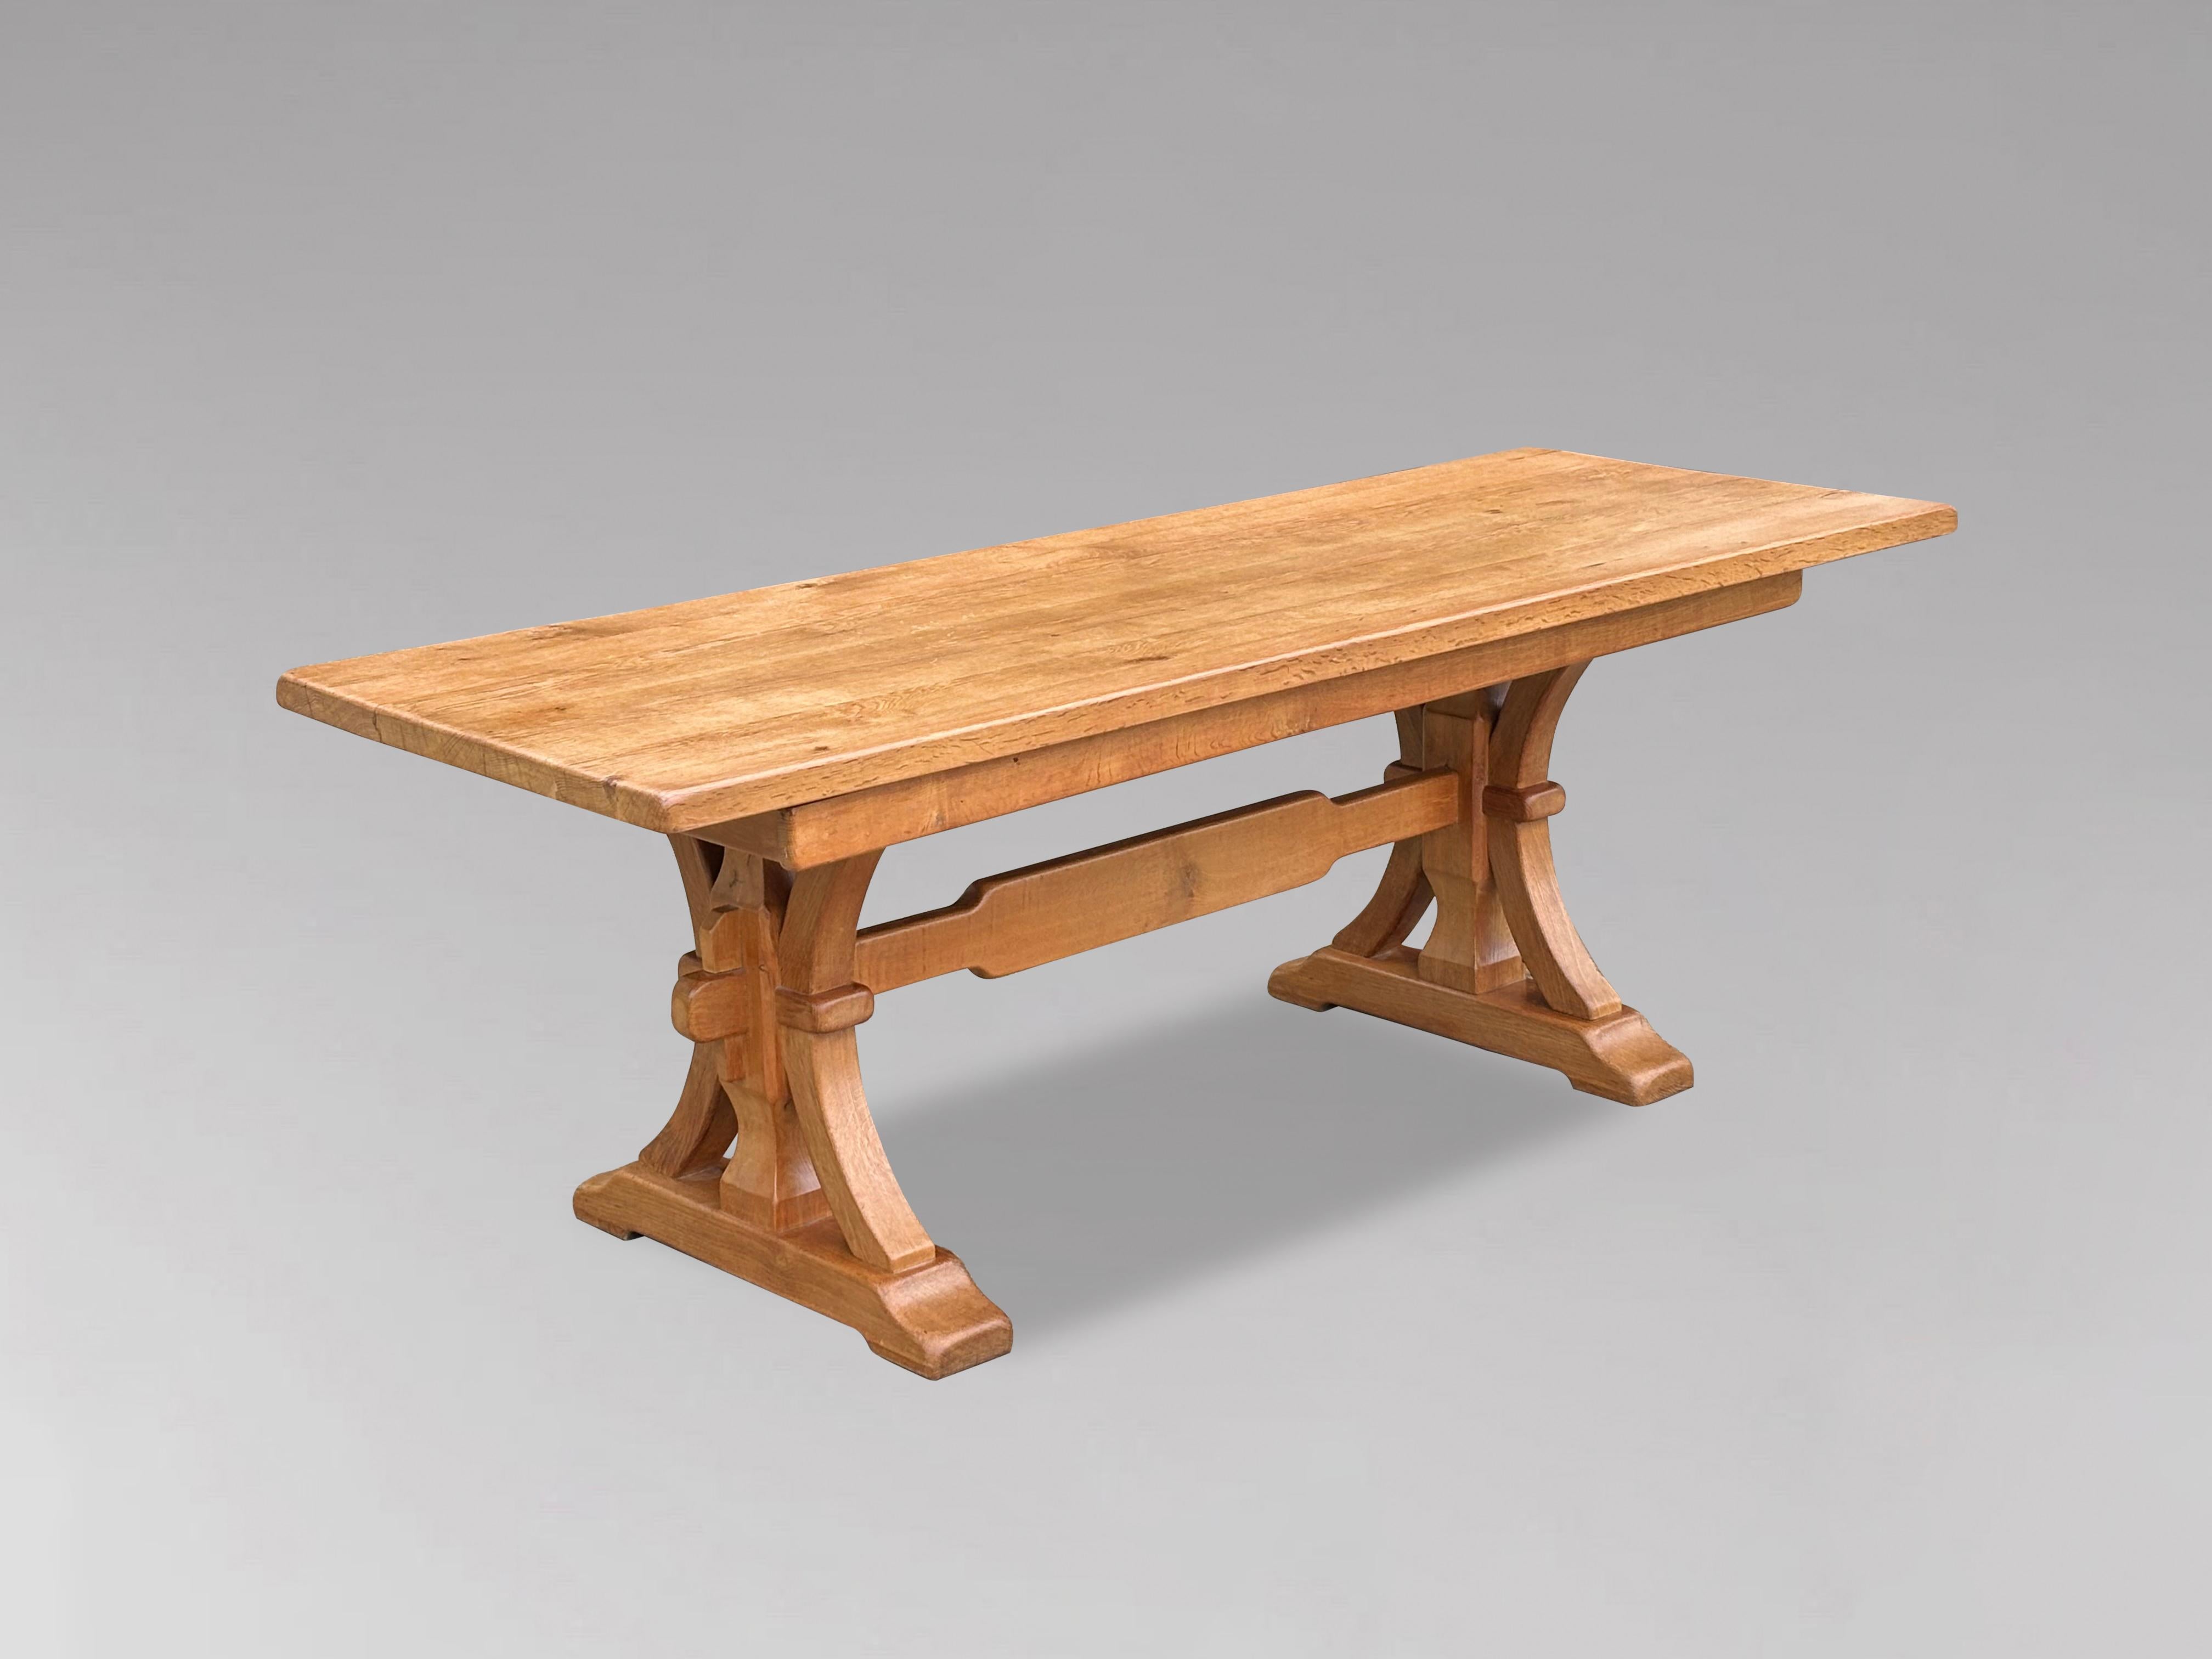 A mid 20th century solid English thick light oak refectory dining table in the Arts & Crafts manner. The beautifully rectangular figured thick oak 4 planked top, supported over a trestle base with peg construction and high central stretcher. A great